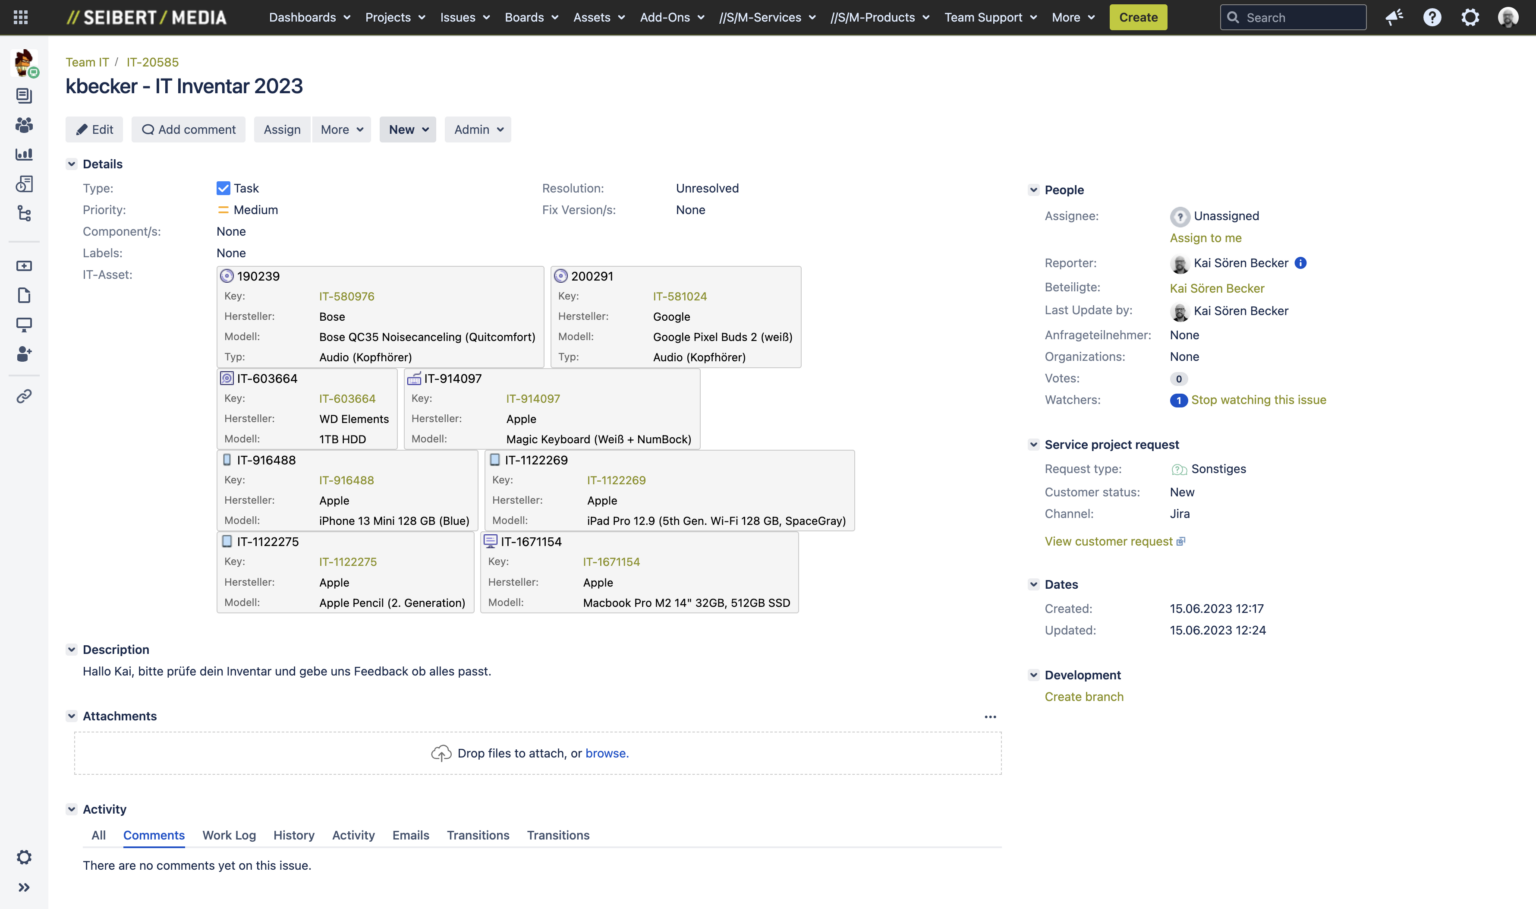 How to IT Service Management (Part 2): Internal IT - IT inventory in Jira